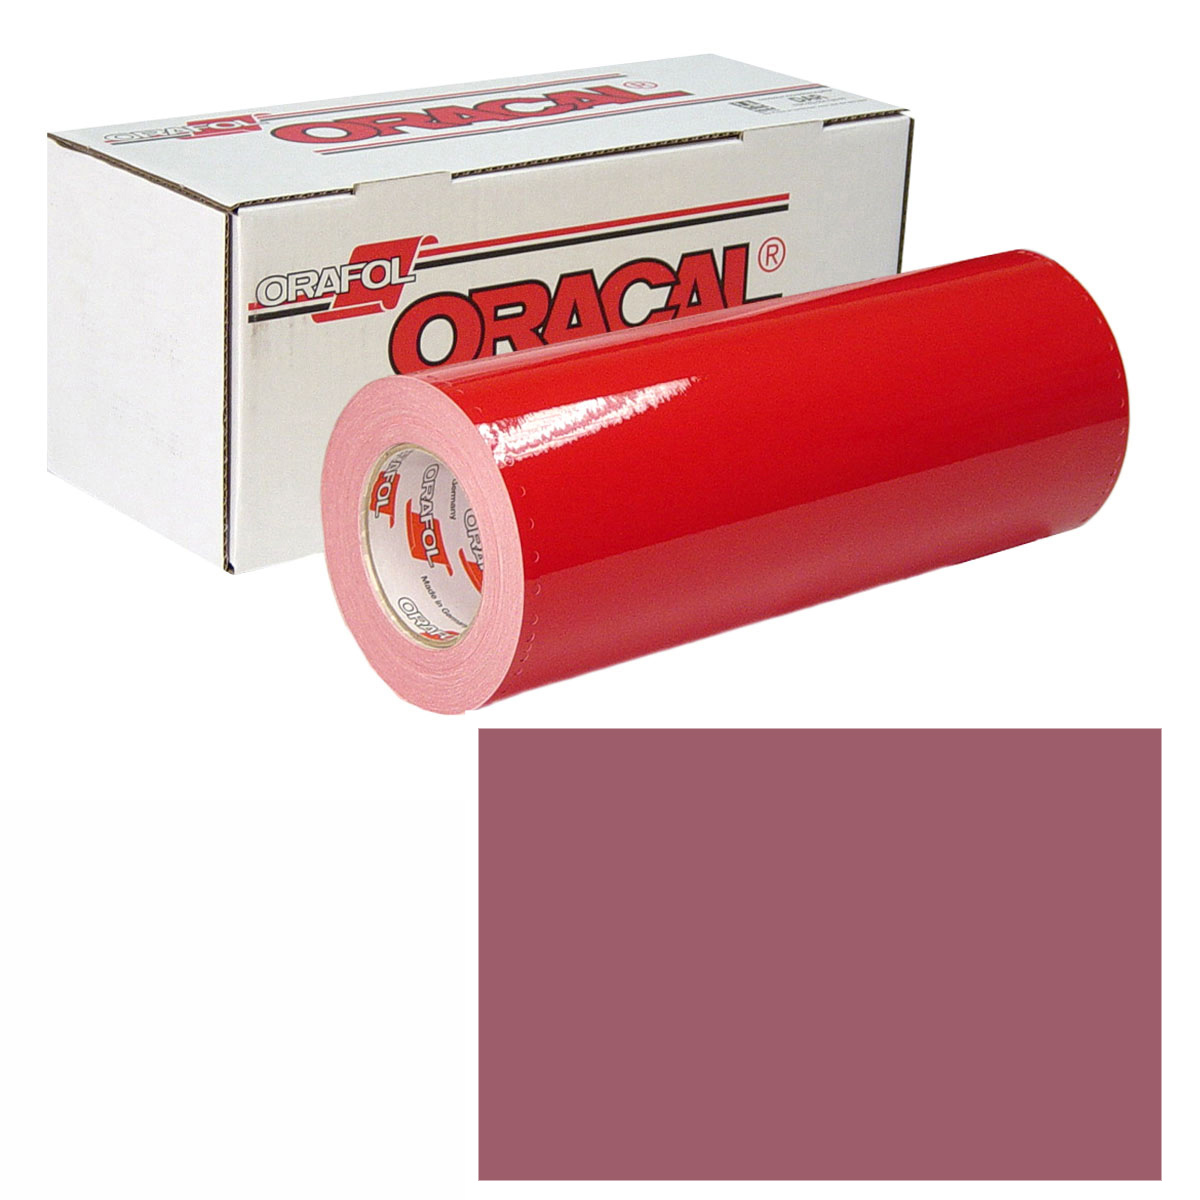 ORACAL 951 15in X 50yd 026 Purple Red